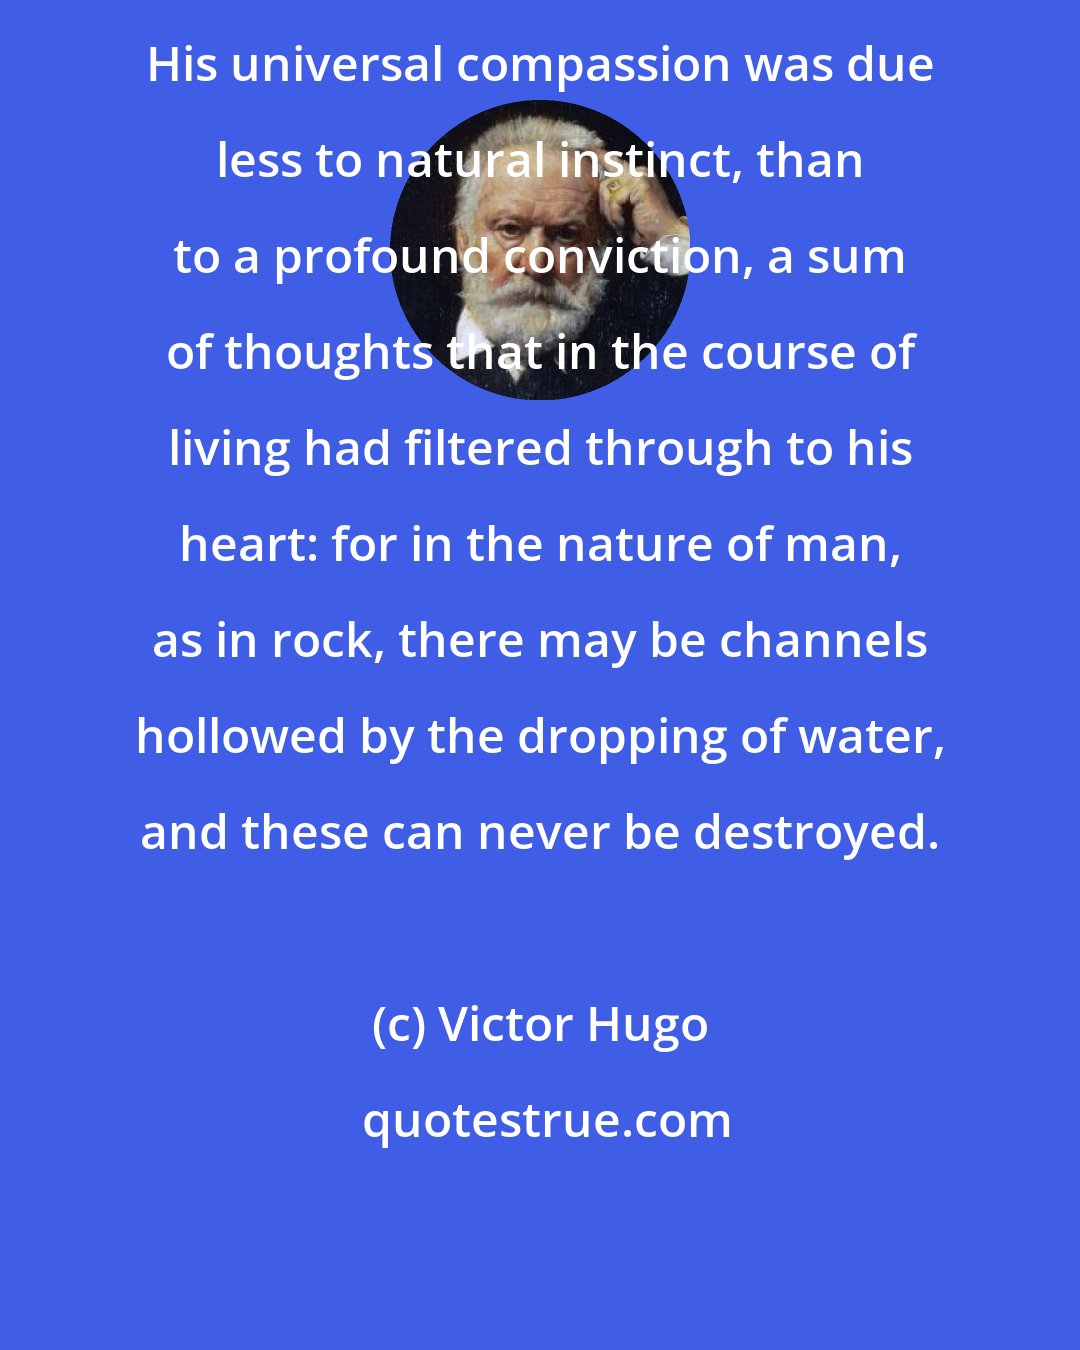 Victor Hugo: His universal compassion was due less to natural instinct, than to a profound conviction, a sum of thoughts that in the course of living had filtered through to his heart: for in the nature of man, as in rock, there may be channels hollowed by the dropping of water, and these can never be destroyed.